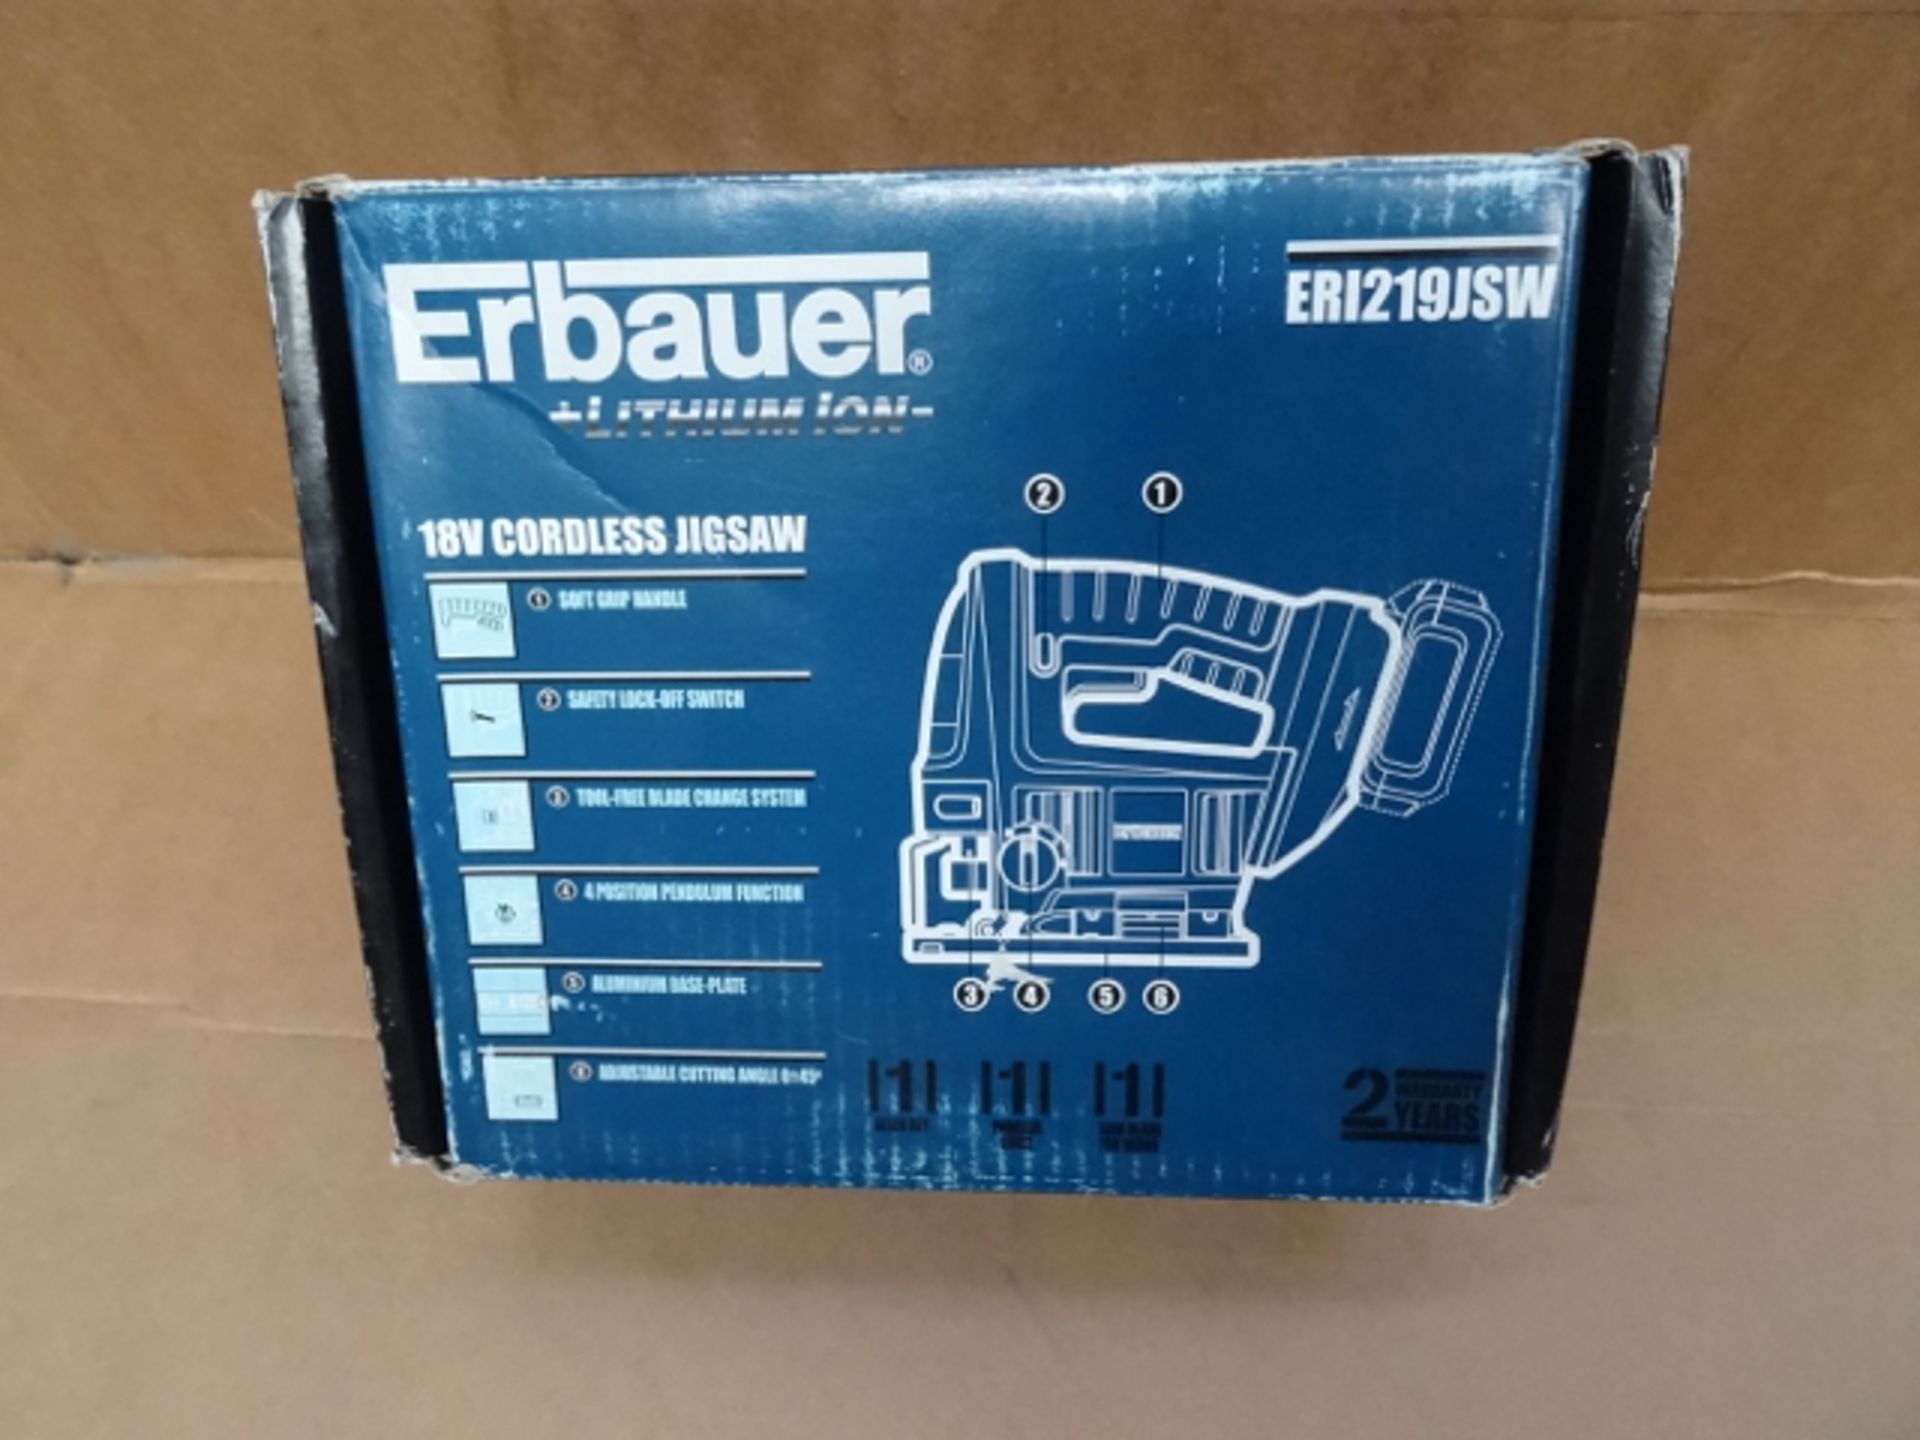 1 x Erbauer 18V Cordless Lithium Ion Cordless Jigsaw Model number: ERI219JSW. Soft grip handle,